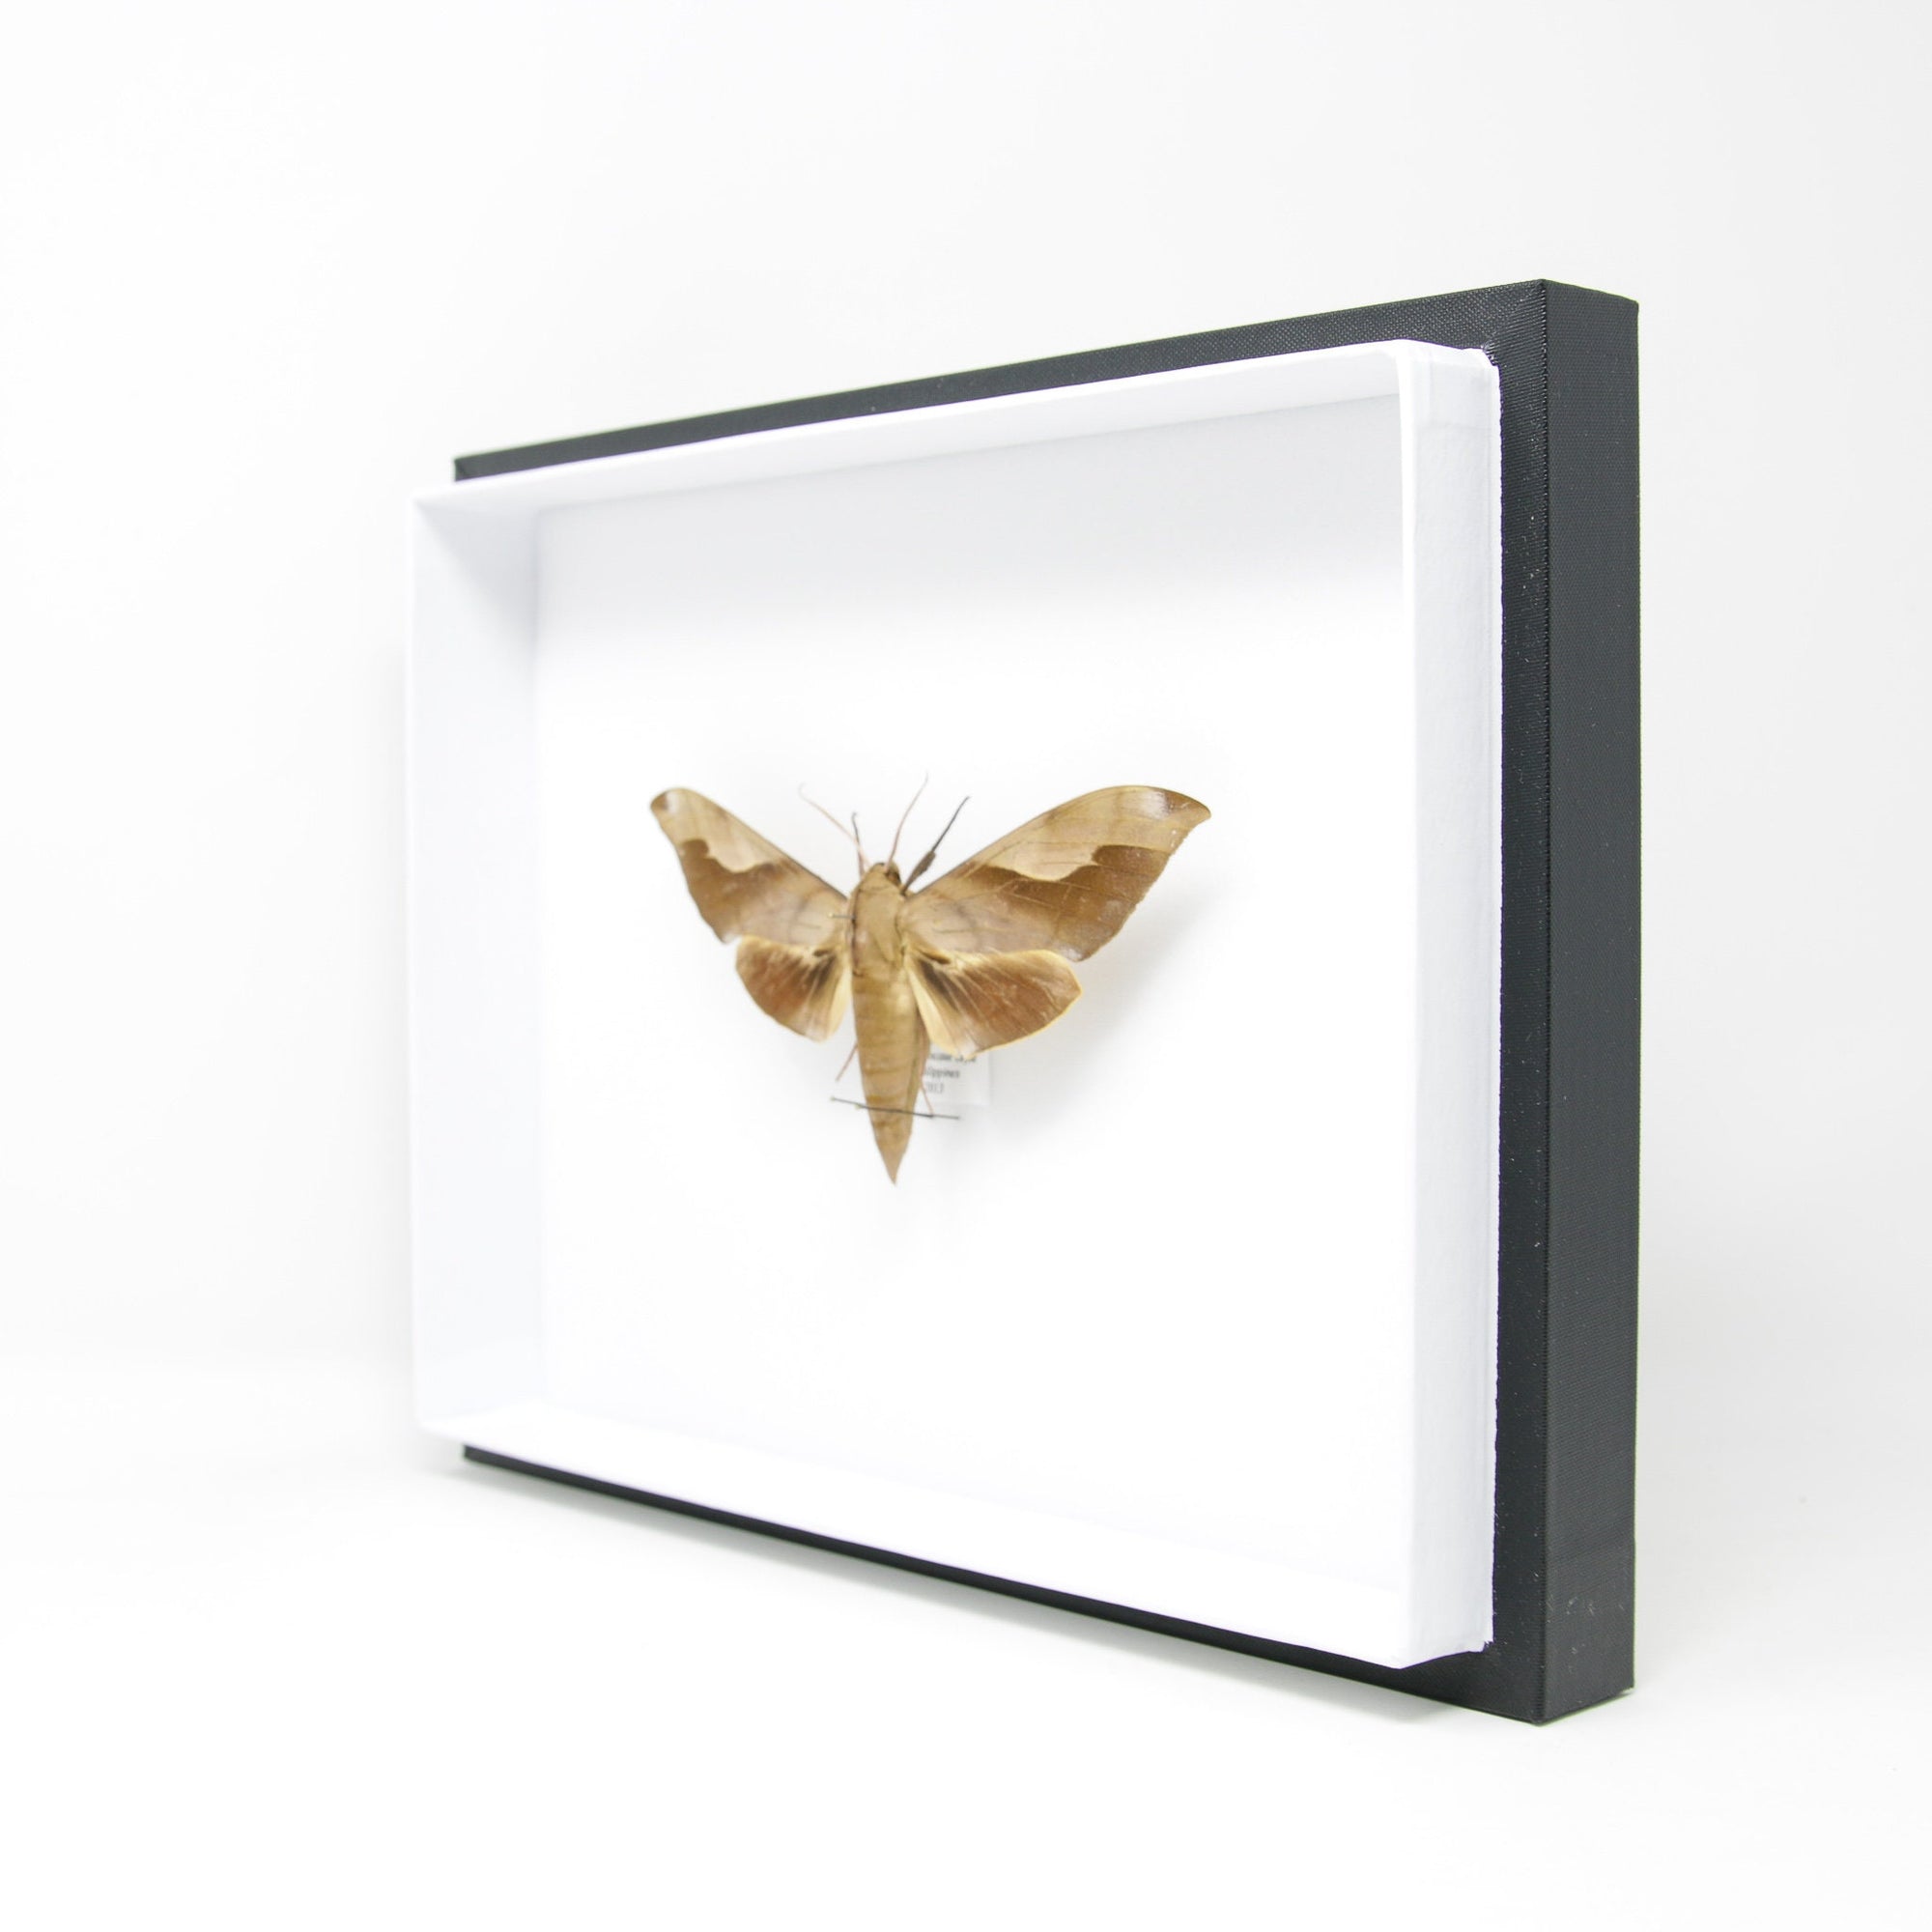 Hawkmoth Set Pinned Specimens | Moth Mounted in Entomology Box Frame with Scientific Collection Data | 11.8x9x2 inch (300×230×55 mm) A1